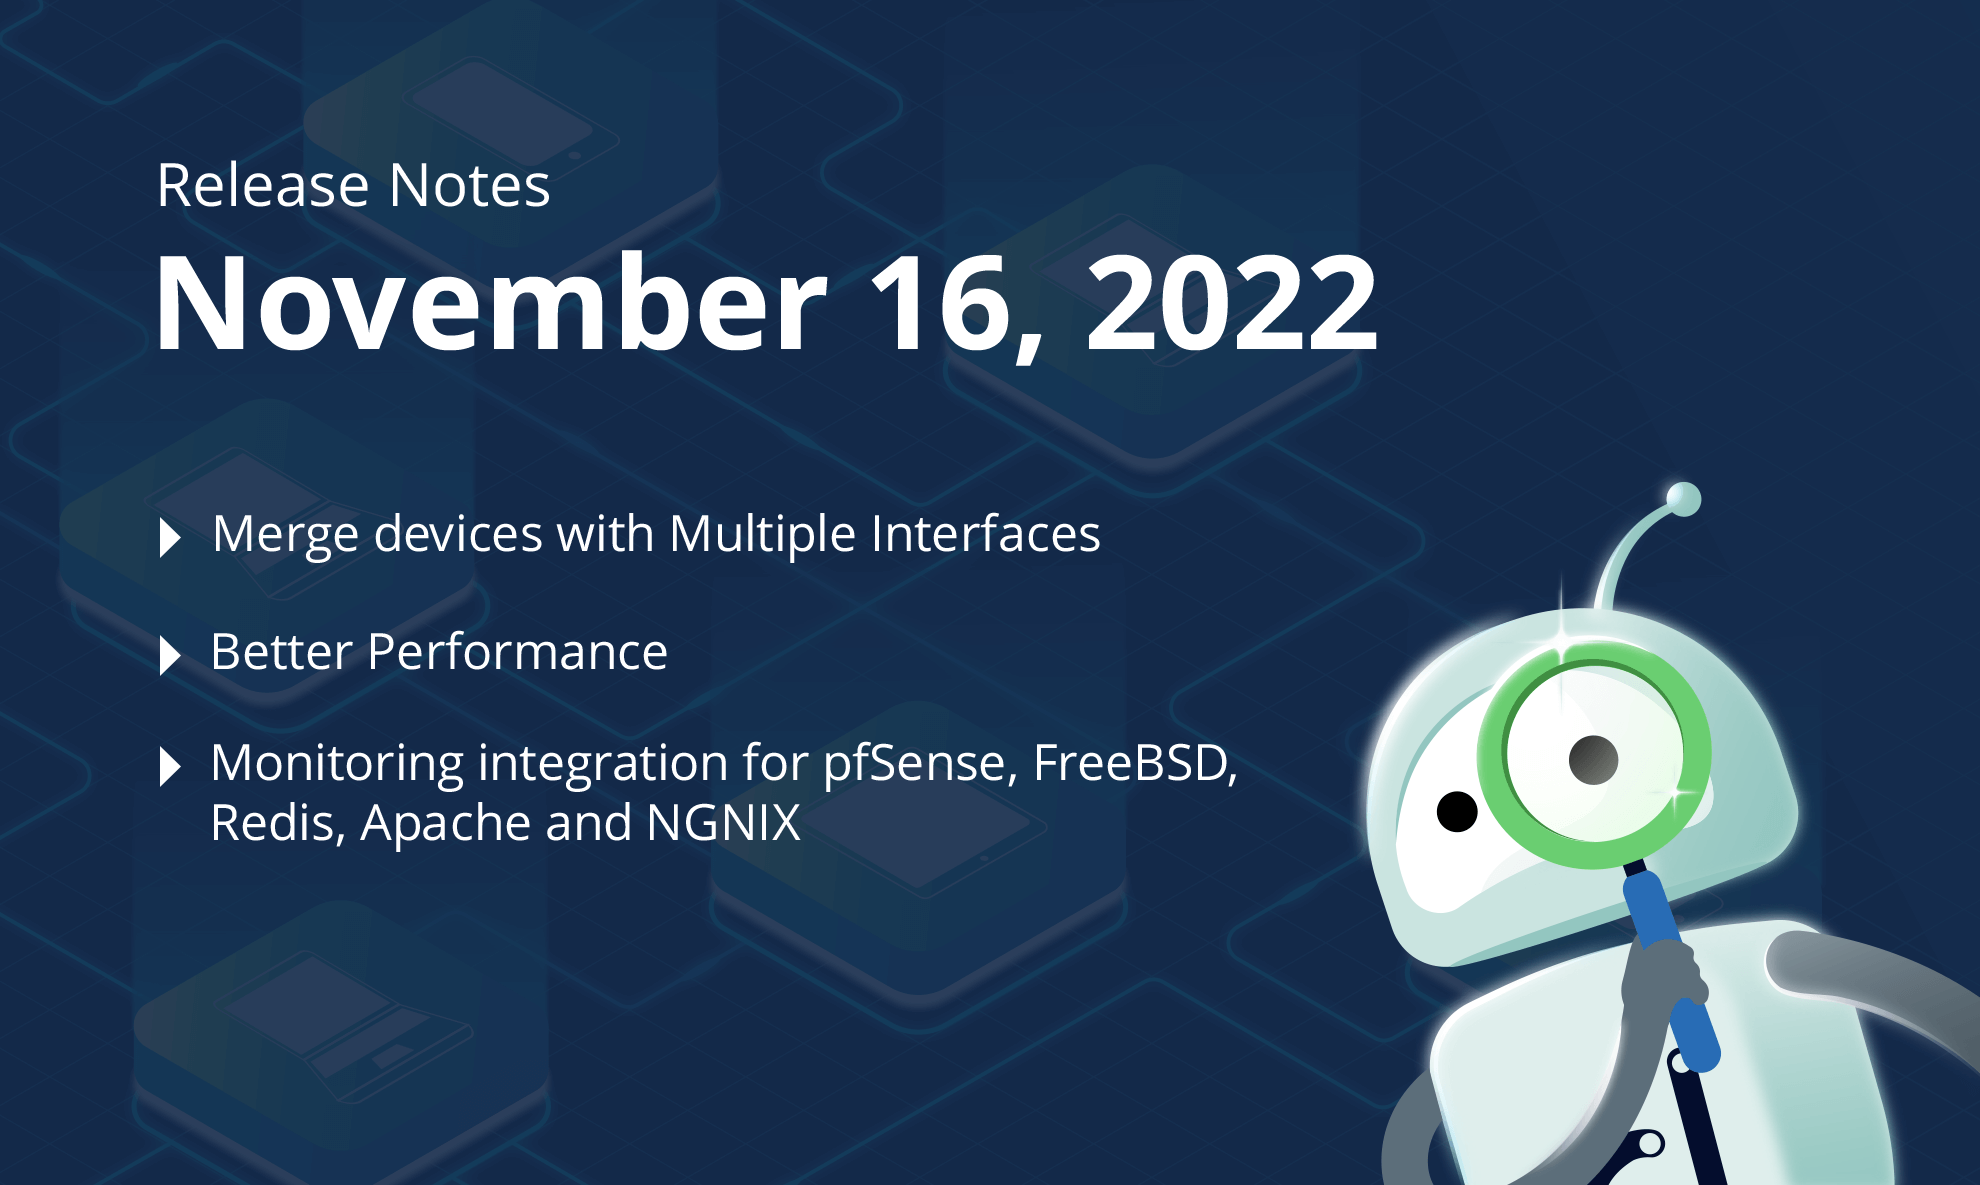 November 16, 2022 – Merge devices with Multiple Interfaces, Better Performance, Monitoring integration for pfSense, FreeBSD, Redis, Apache and NGNIX